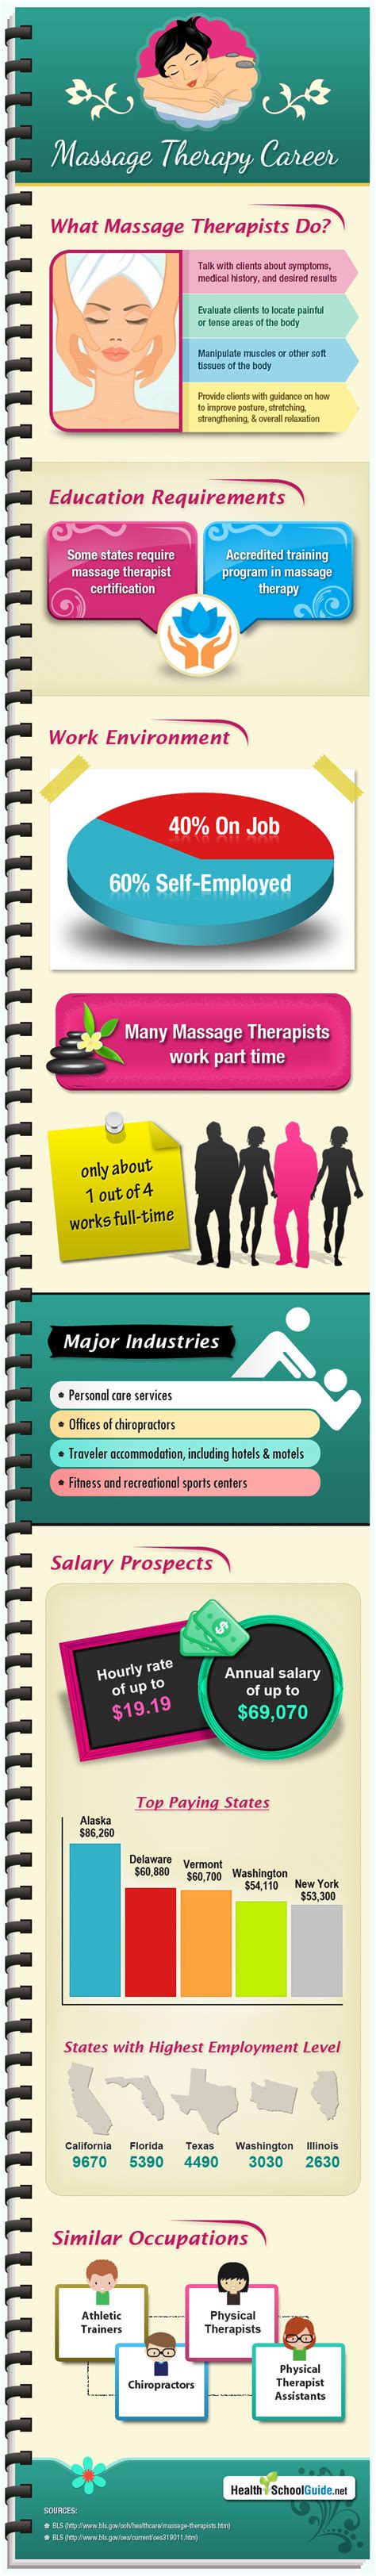 Infographic Massage Therapy Career Information And Guide